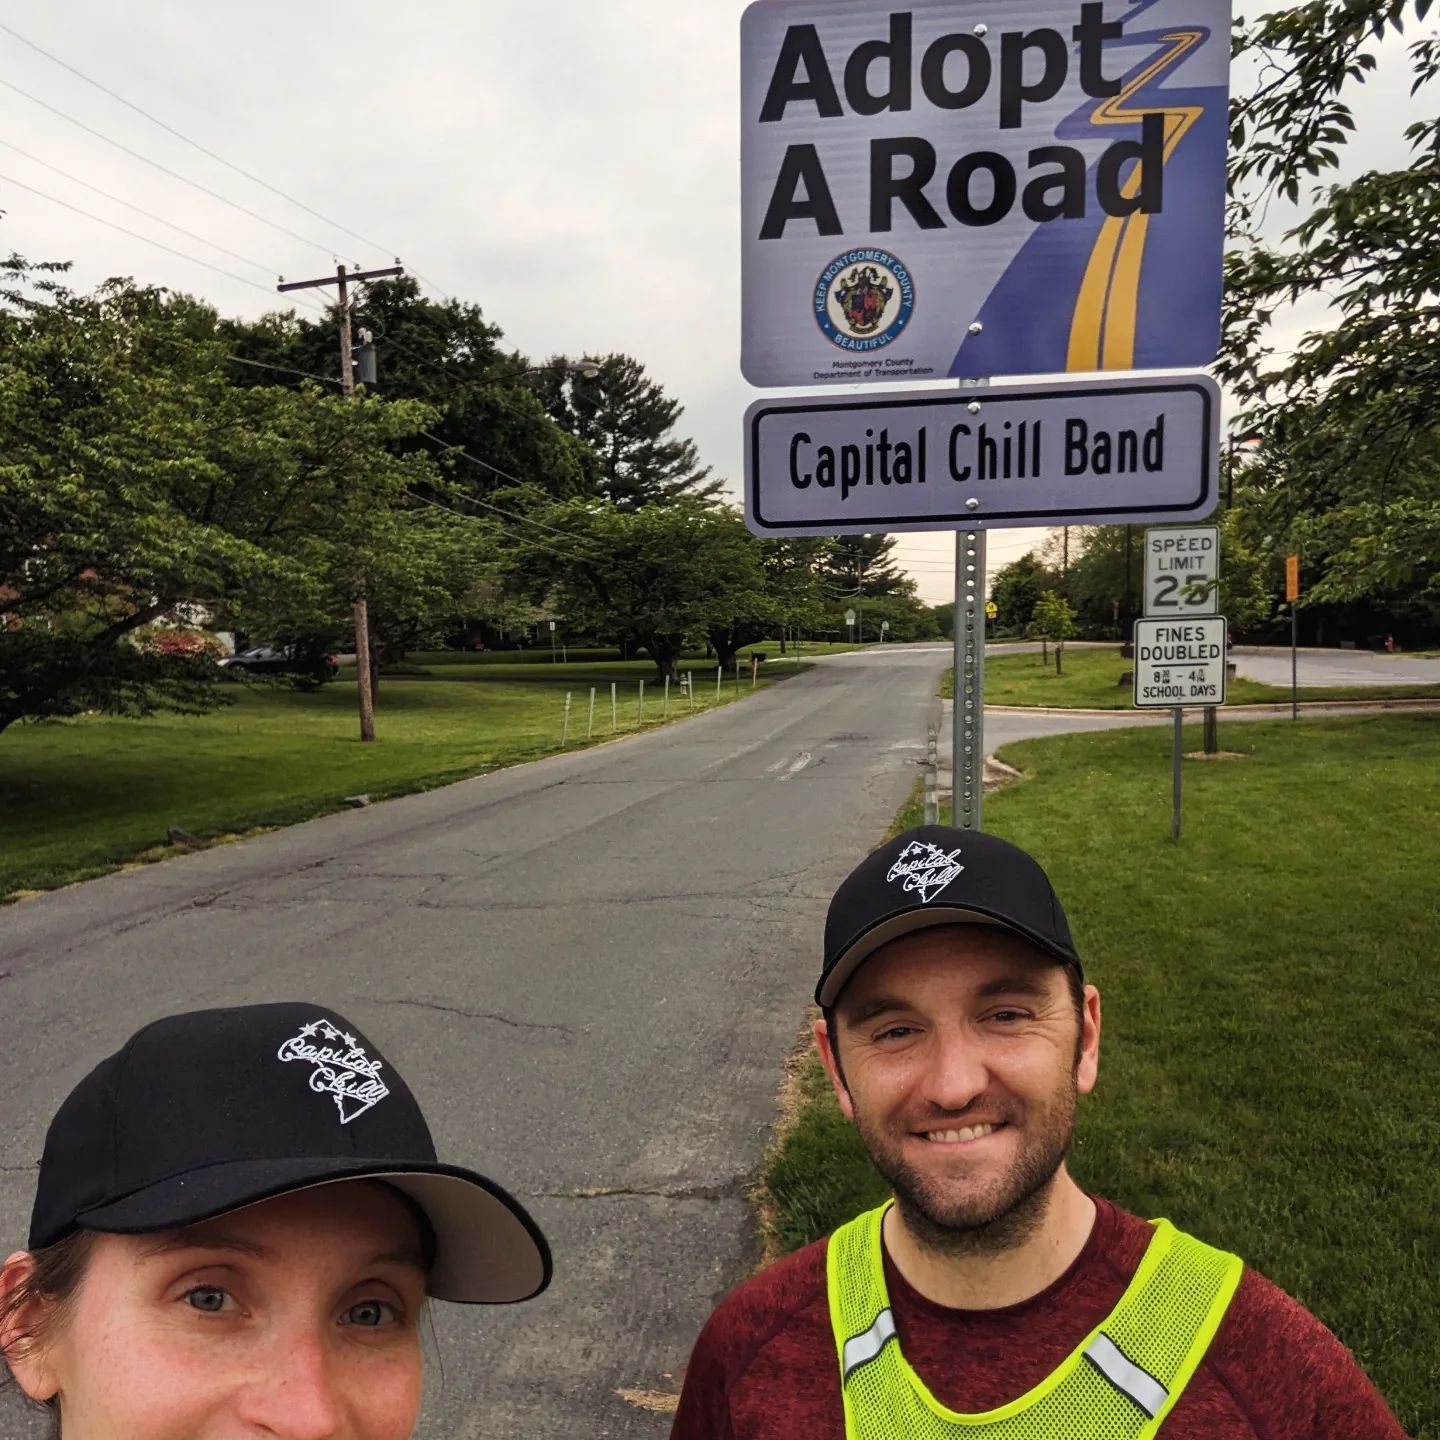 Selfless and Shameless promotion at the same time!? First road cleanup  DONE! #mcdot #adoptaroad #adoptaroadcleanup #cleanup #cleaning #clean #m #trash #environment #recycle #litter #plasticpollution #nature #zerowaste #trashtag #plasticfree #polluti